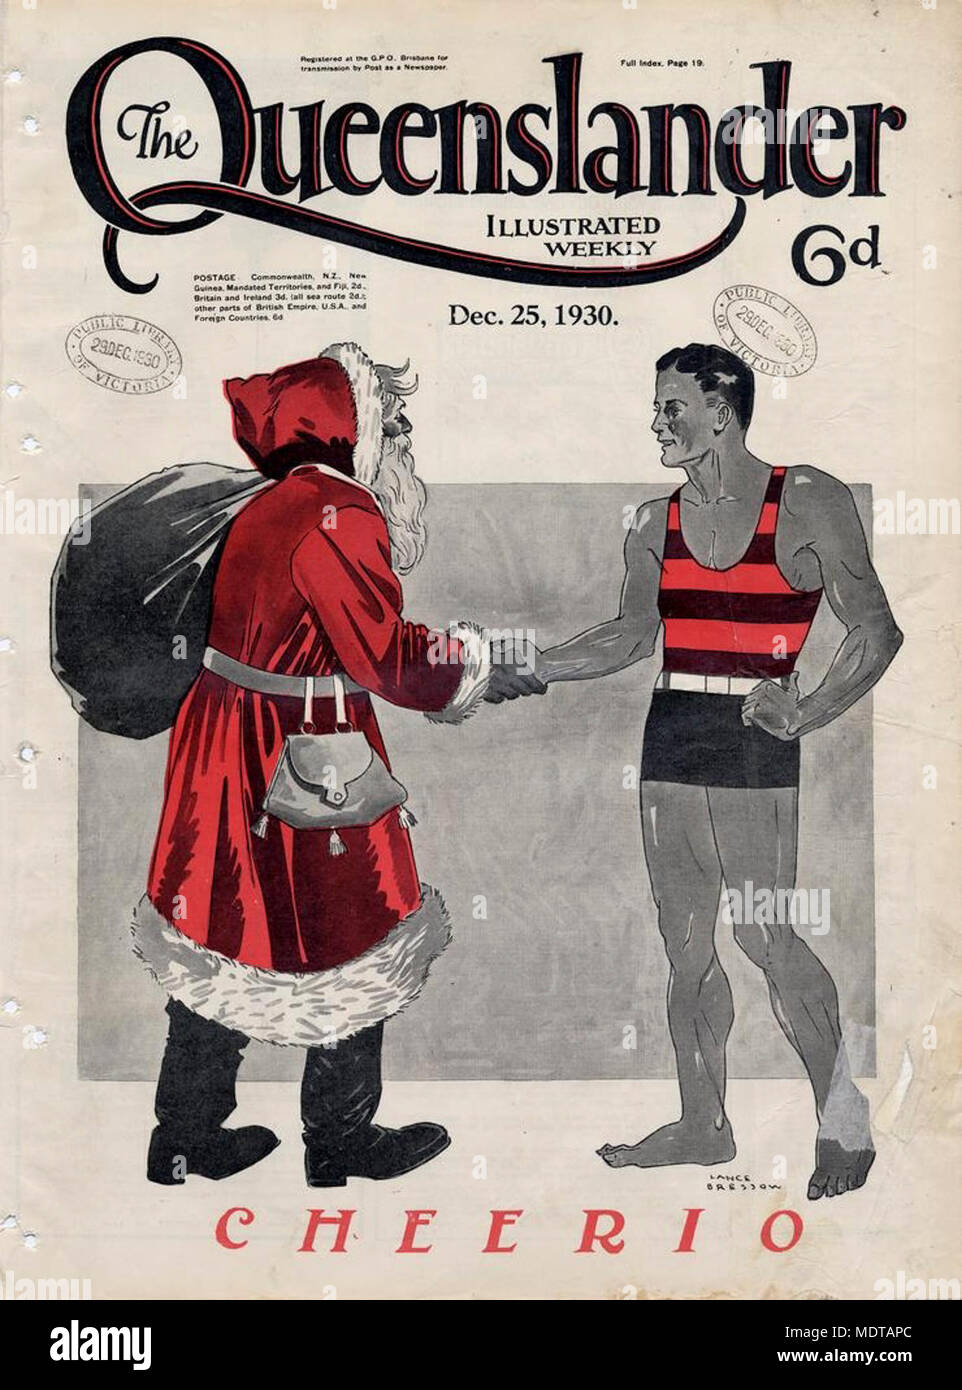 Illustrated front cover from The Queenslander December 25 1930. Location:Queensland  Description:Caption: Cheerio. Illustration of Santa Claus, with his sack over his shoulder, shaking hands with an athletic looking man in a one-piece swimsuit. Stock Photo